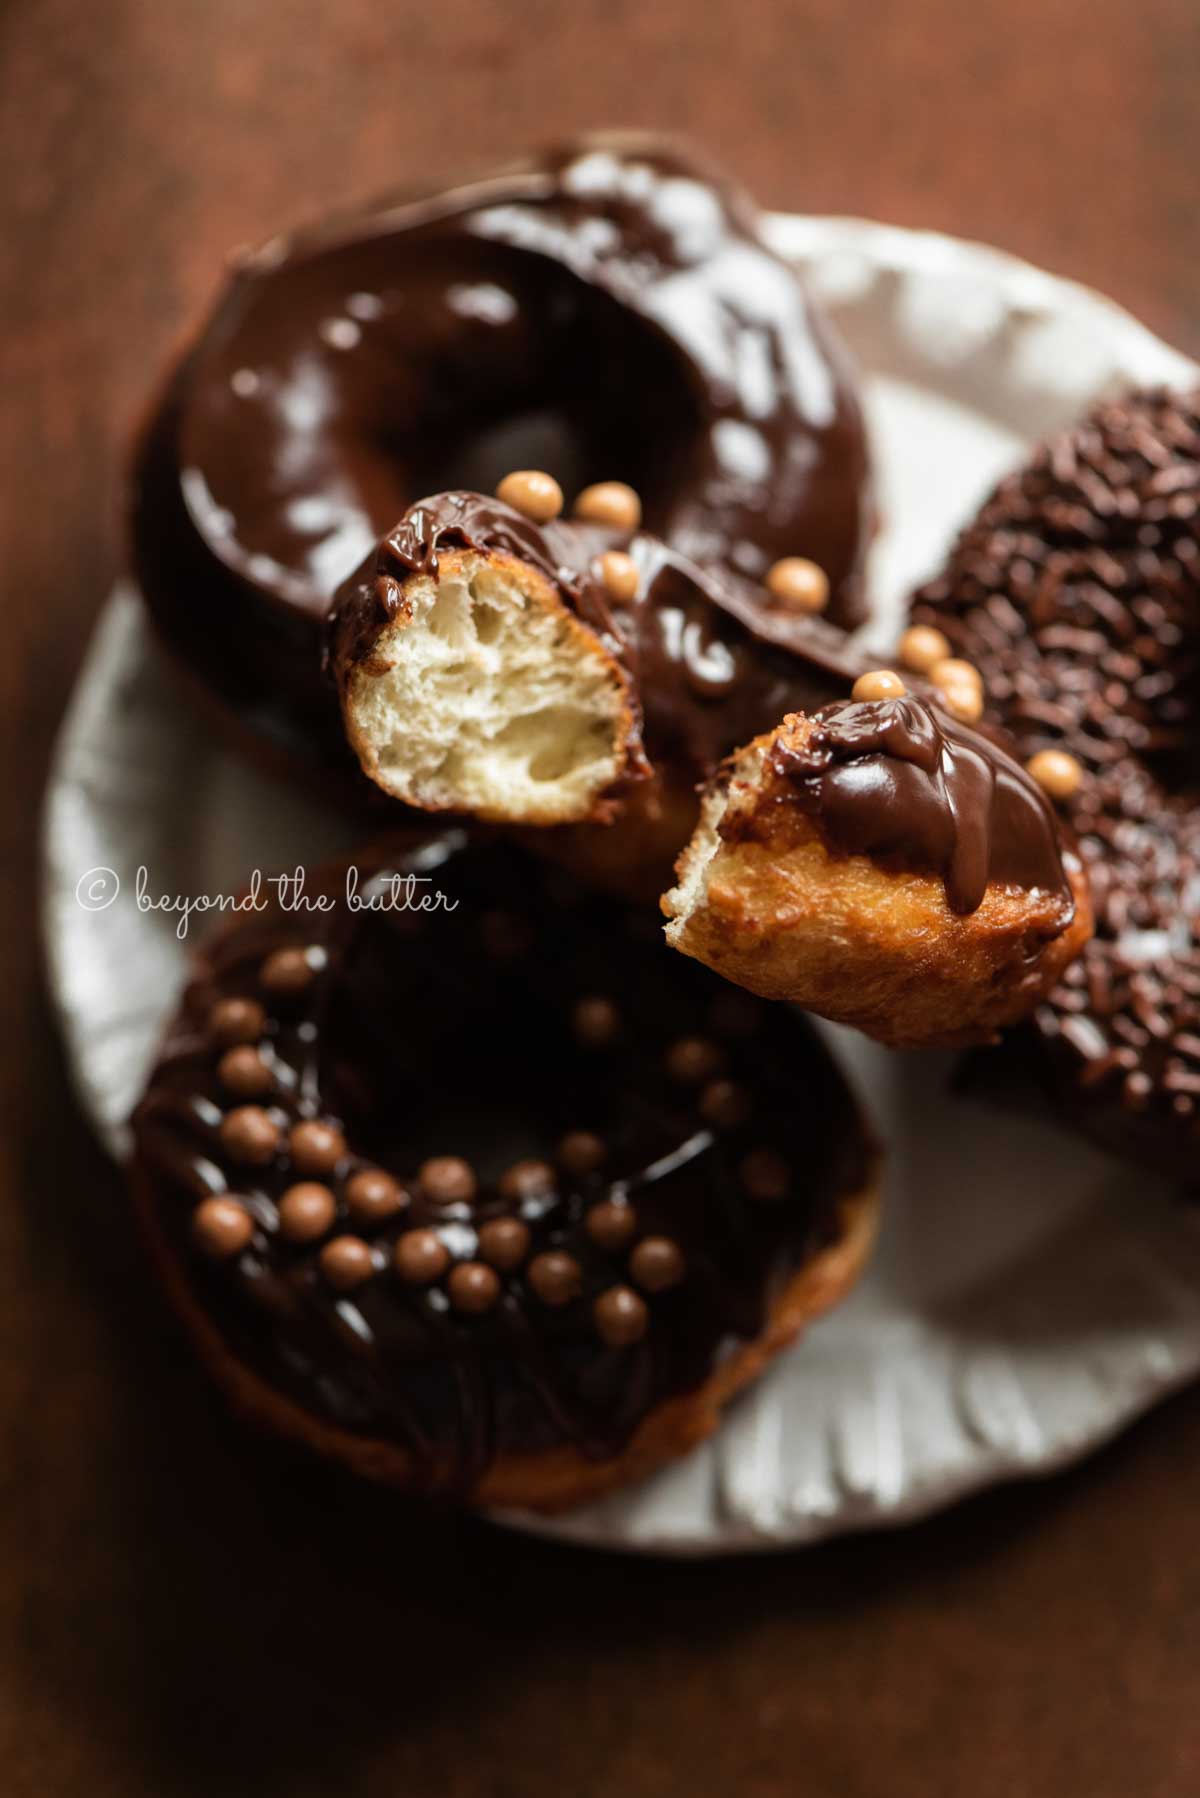 Chocolate glazed donuts stacked on a dessert plate with bite taken out of the top donut | All Images © Beyond the Butter™